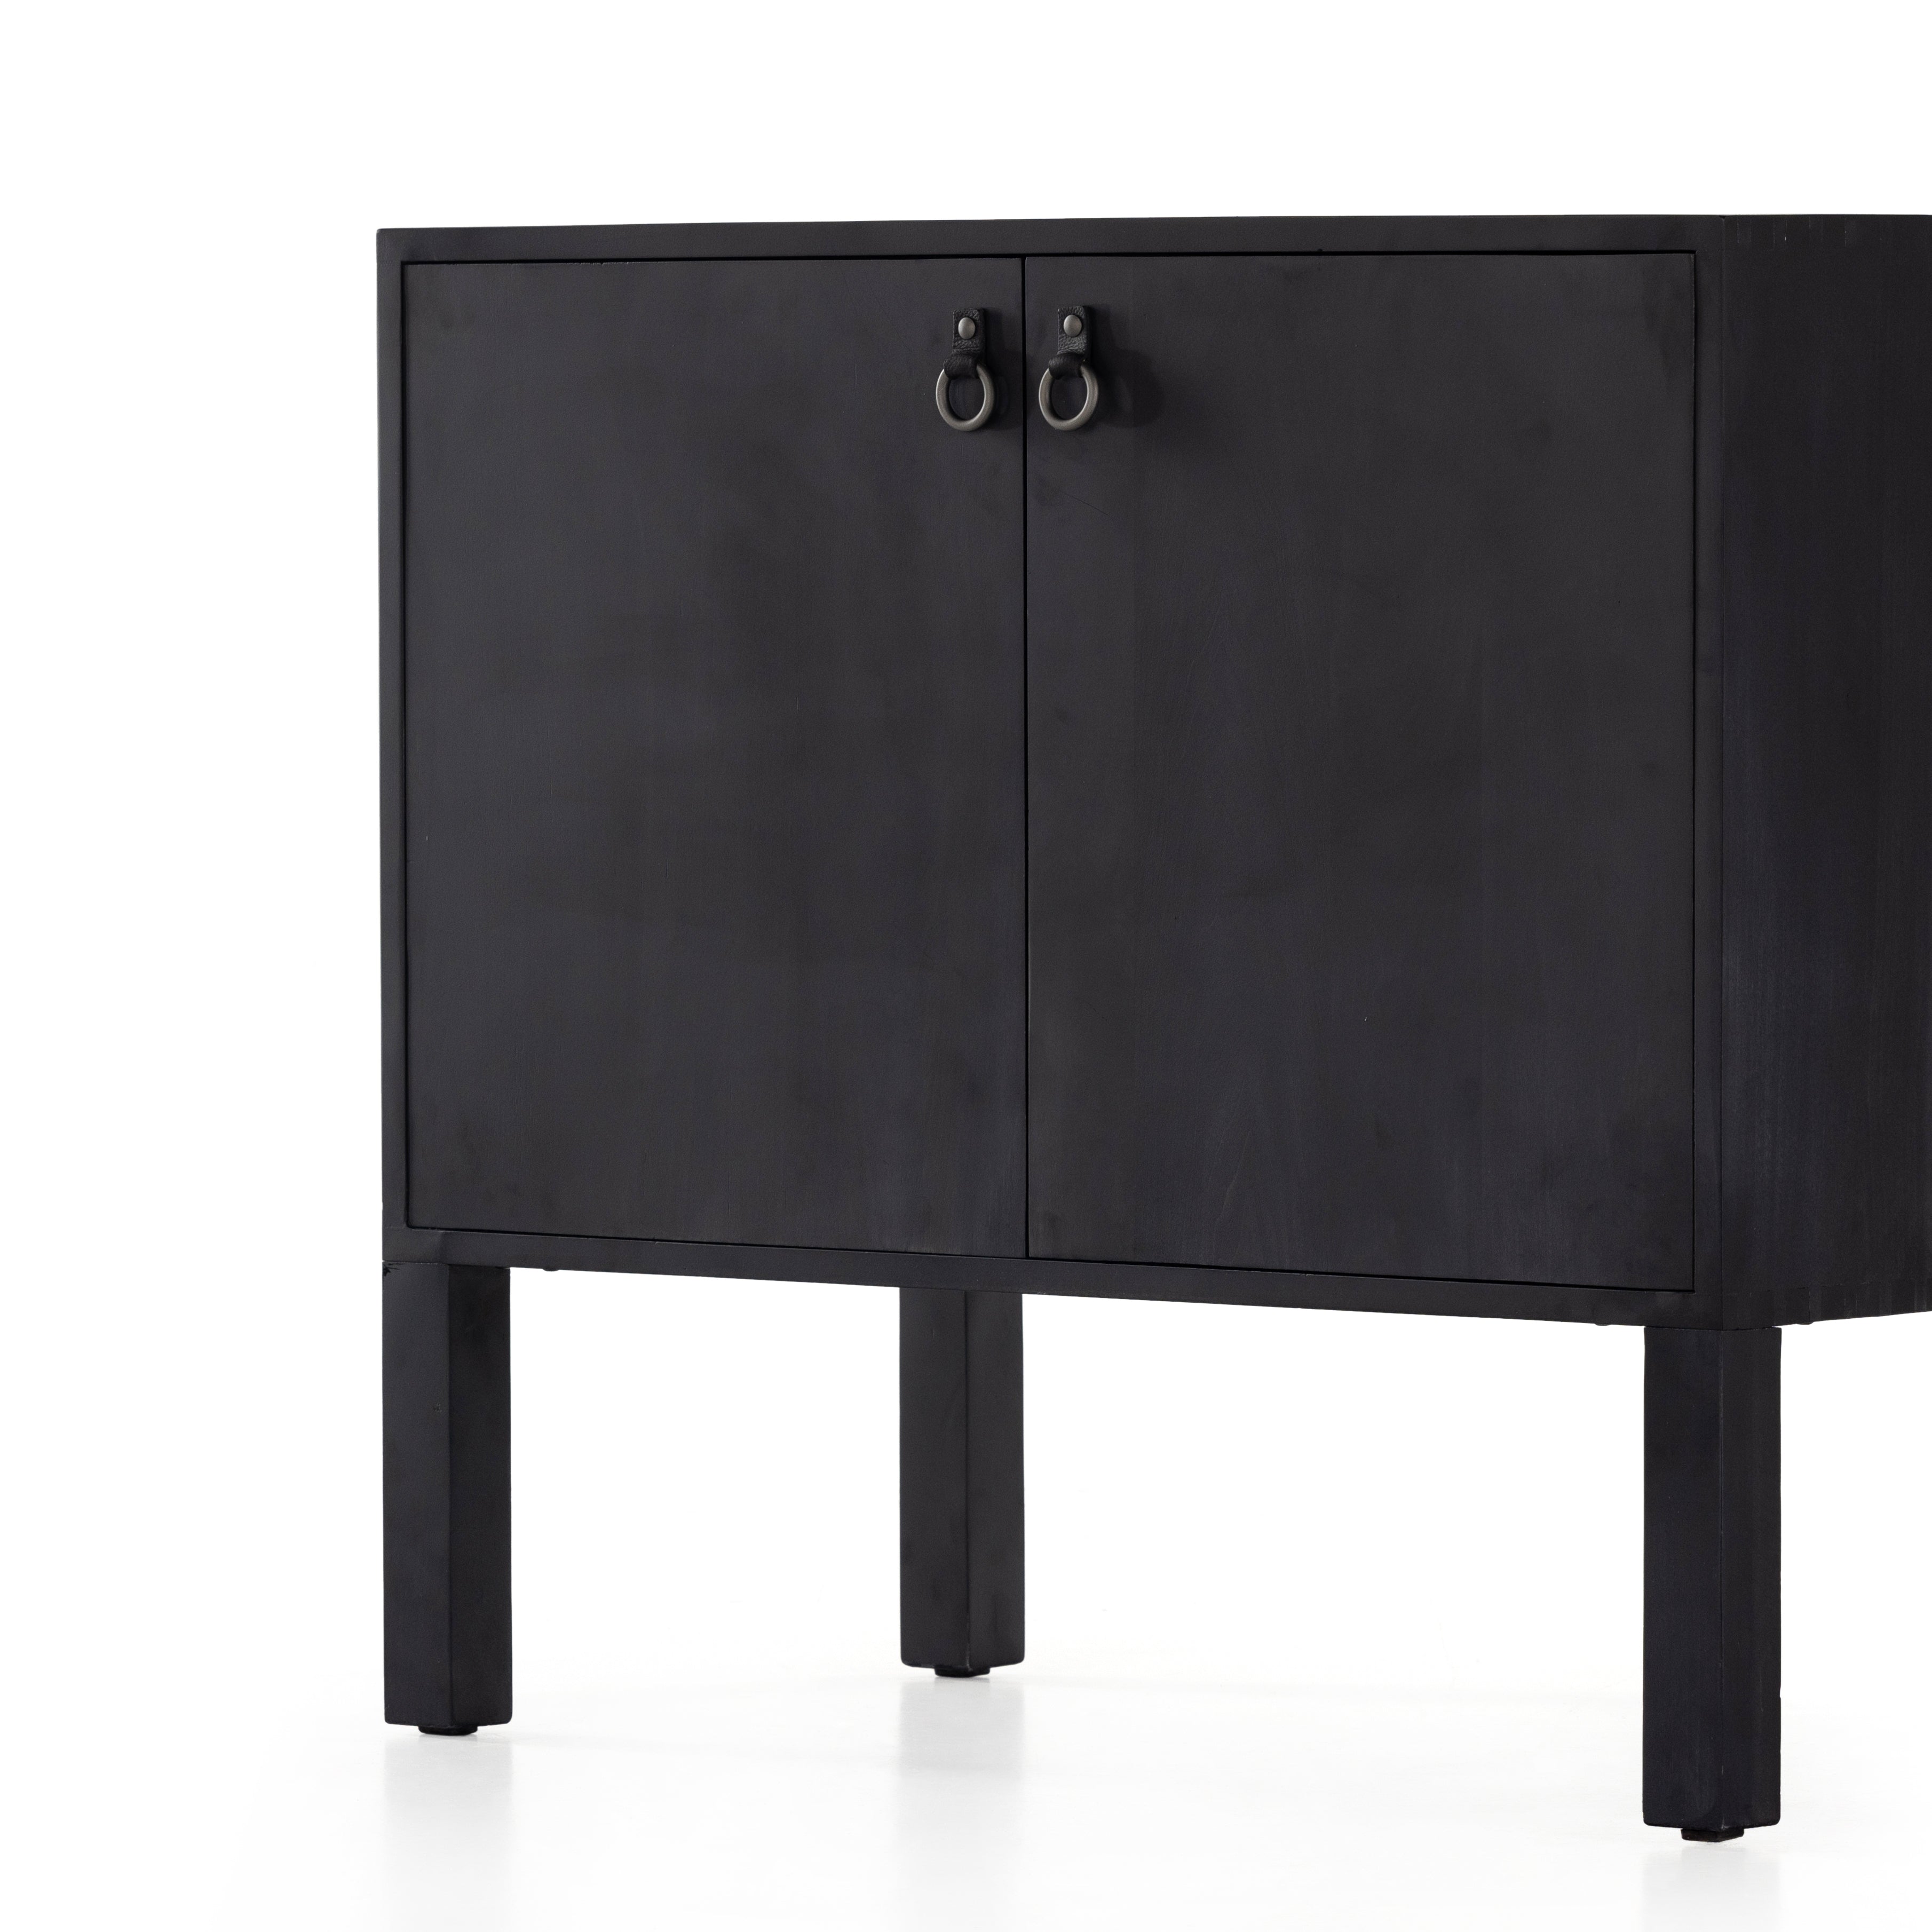 Beautifully simple in spirit. Black-washed solid poplar forms a Parsons-style bar cabinet, with iron and leather hardware for a material-driven update to Shaker-inspired styling. Inside, dual drawers plus generous bottle storage await drink go-tos and bar accessories. Amethyst Home provides interior design, new construction, custom furniture, and area rugs in the Des Moines metro area.